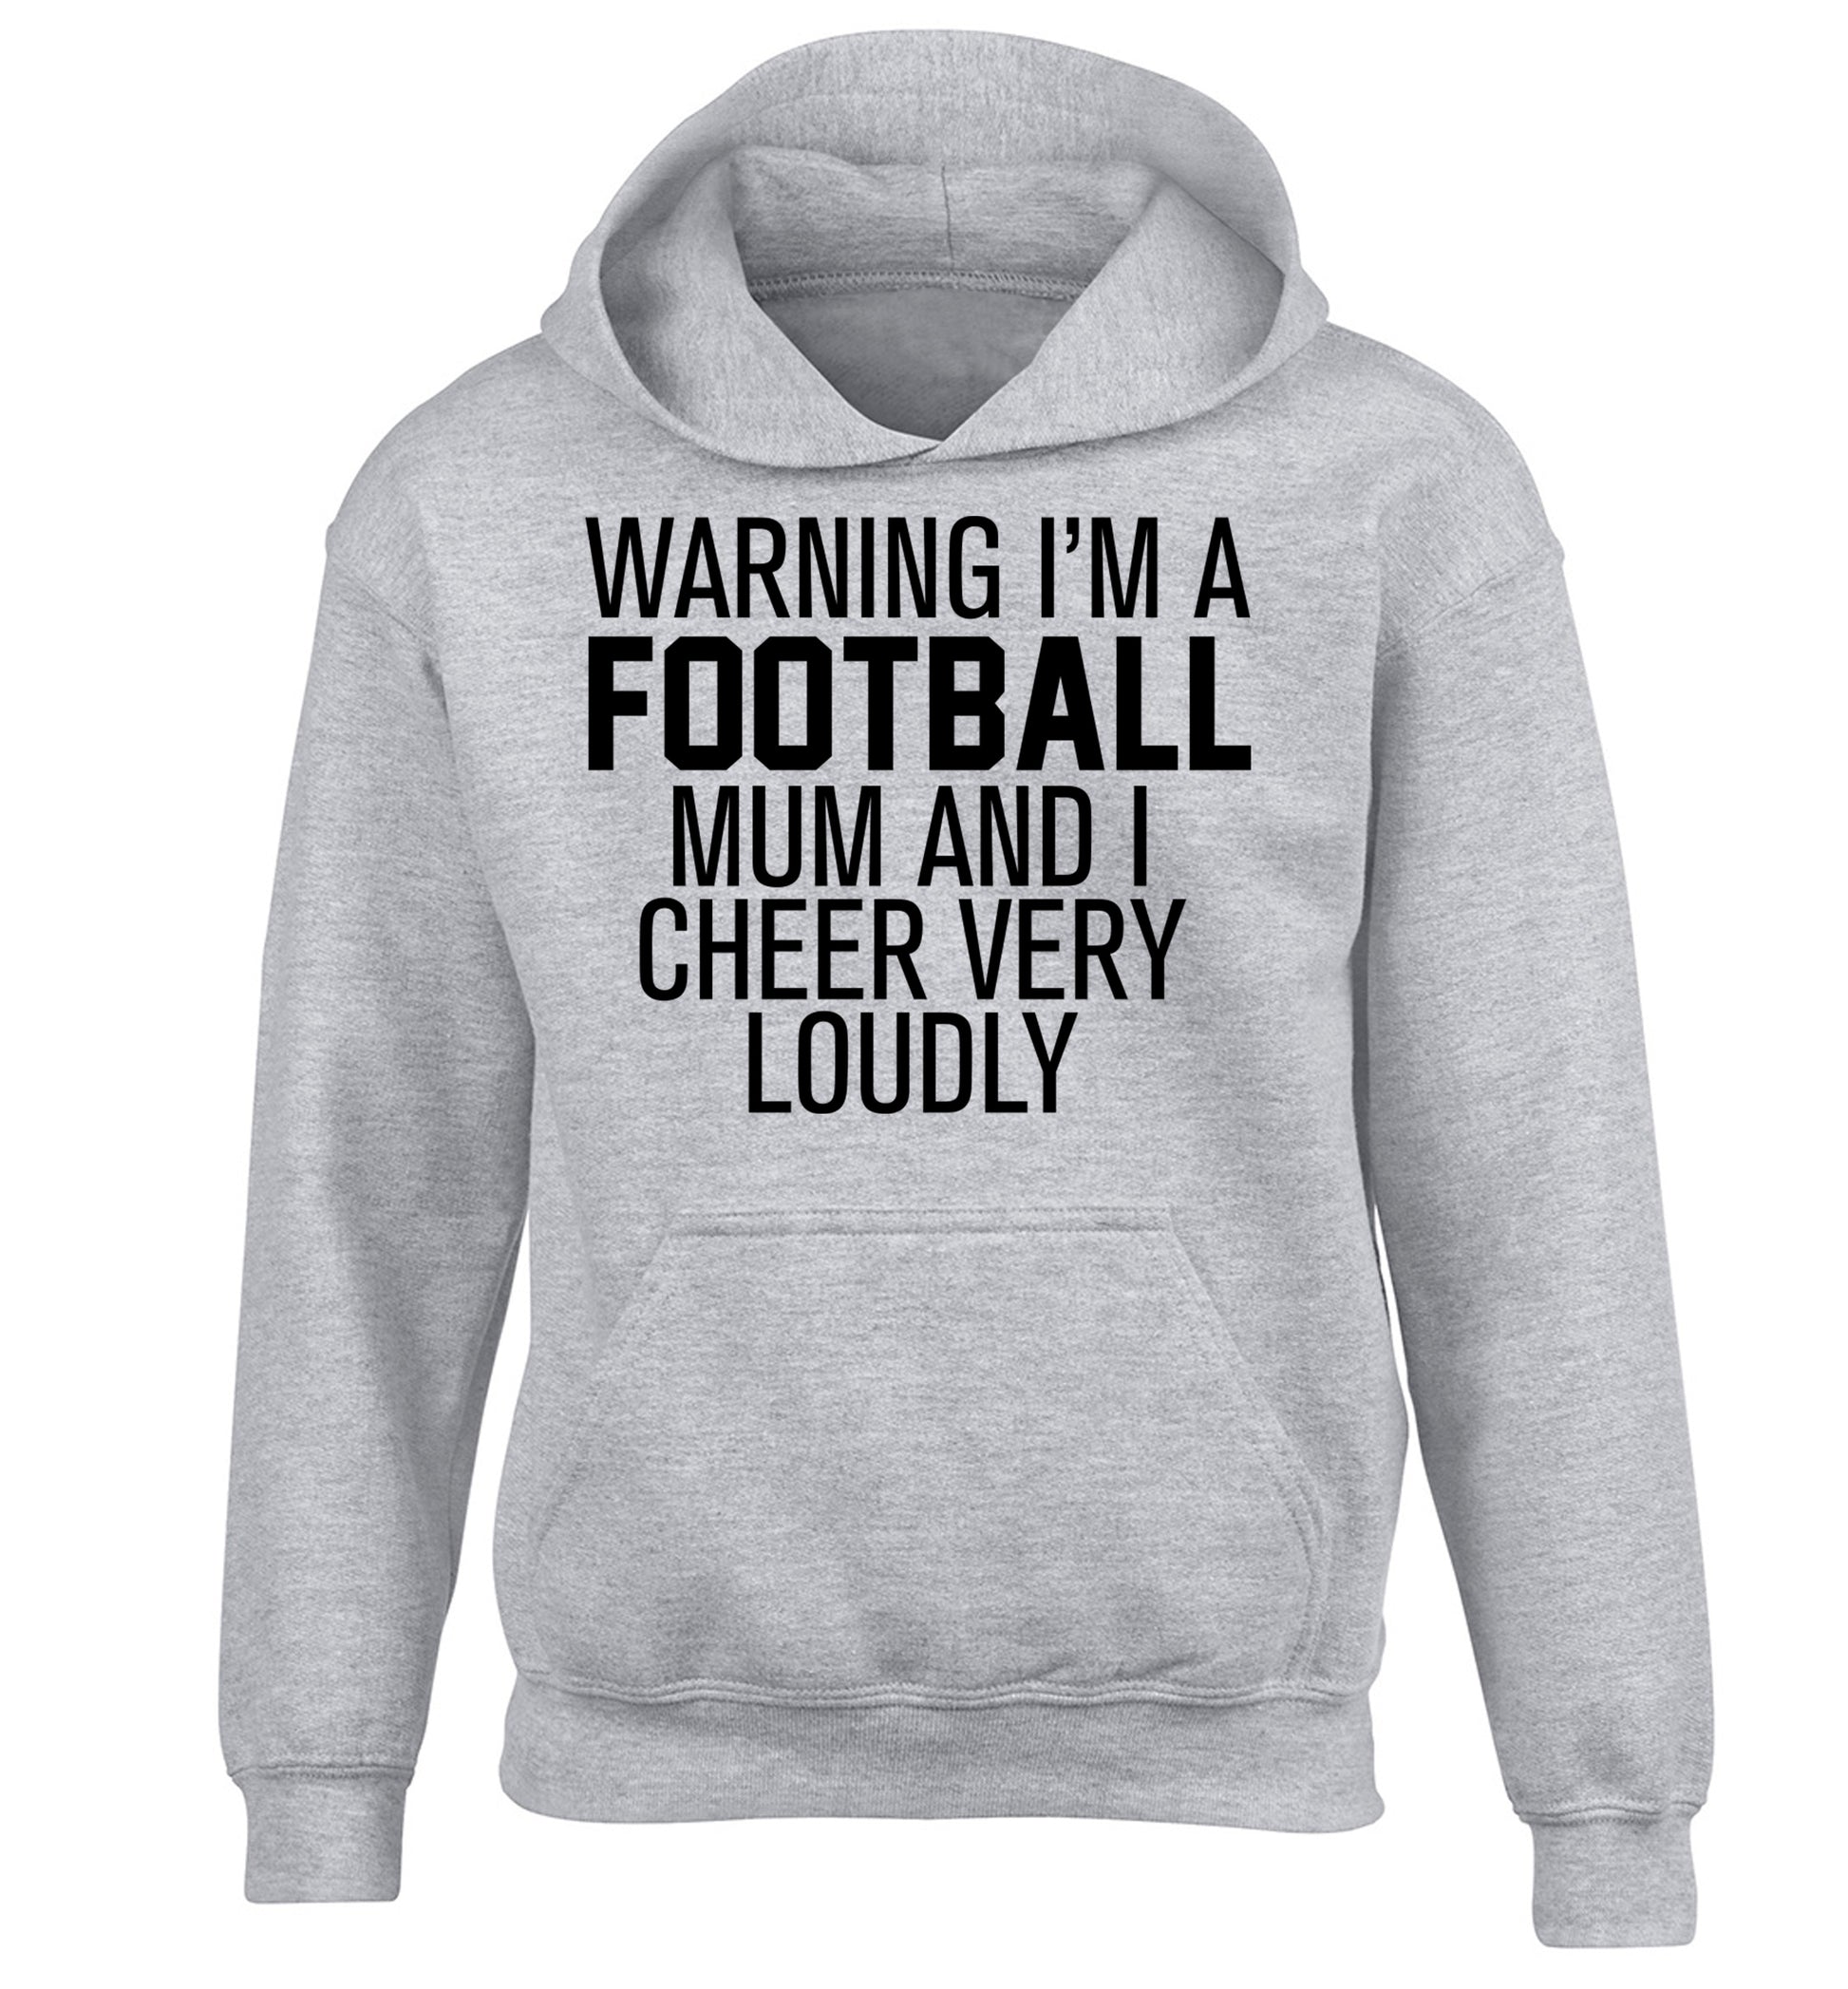 Warning I'm a football mum and I cheer very loudly children's grey hoodie 12-14 Years